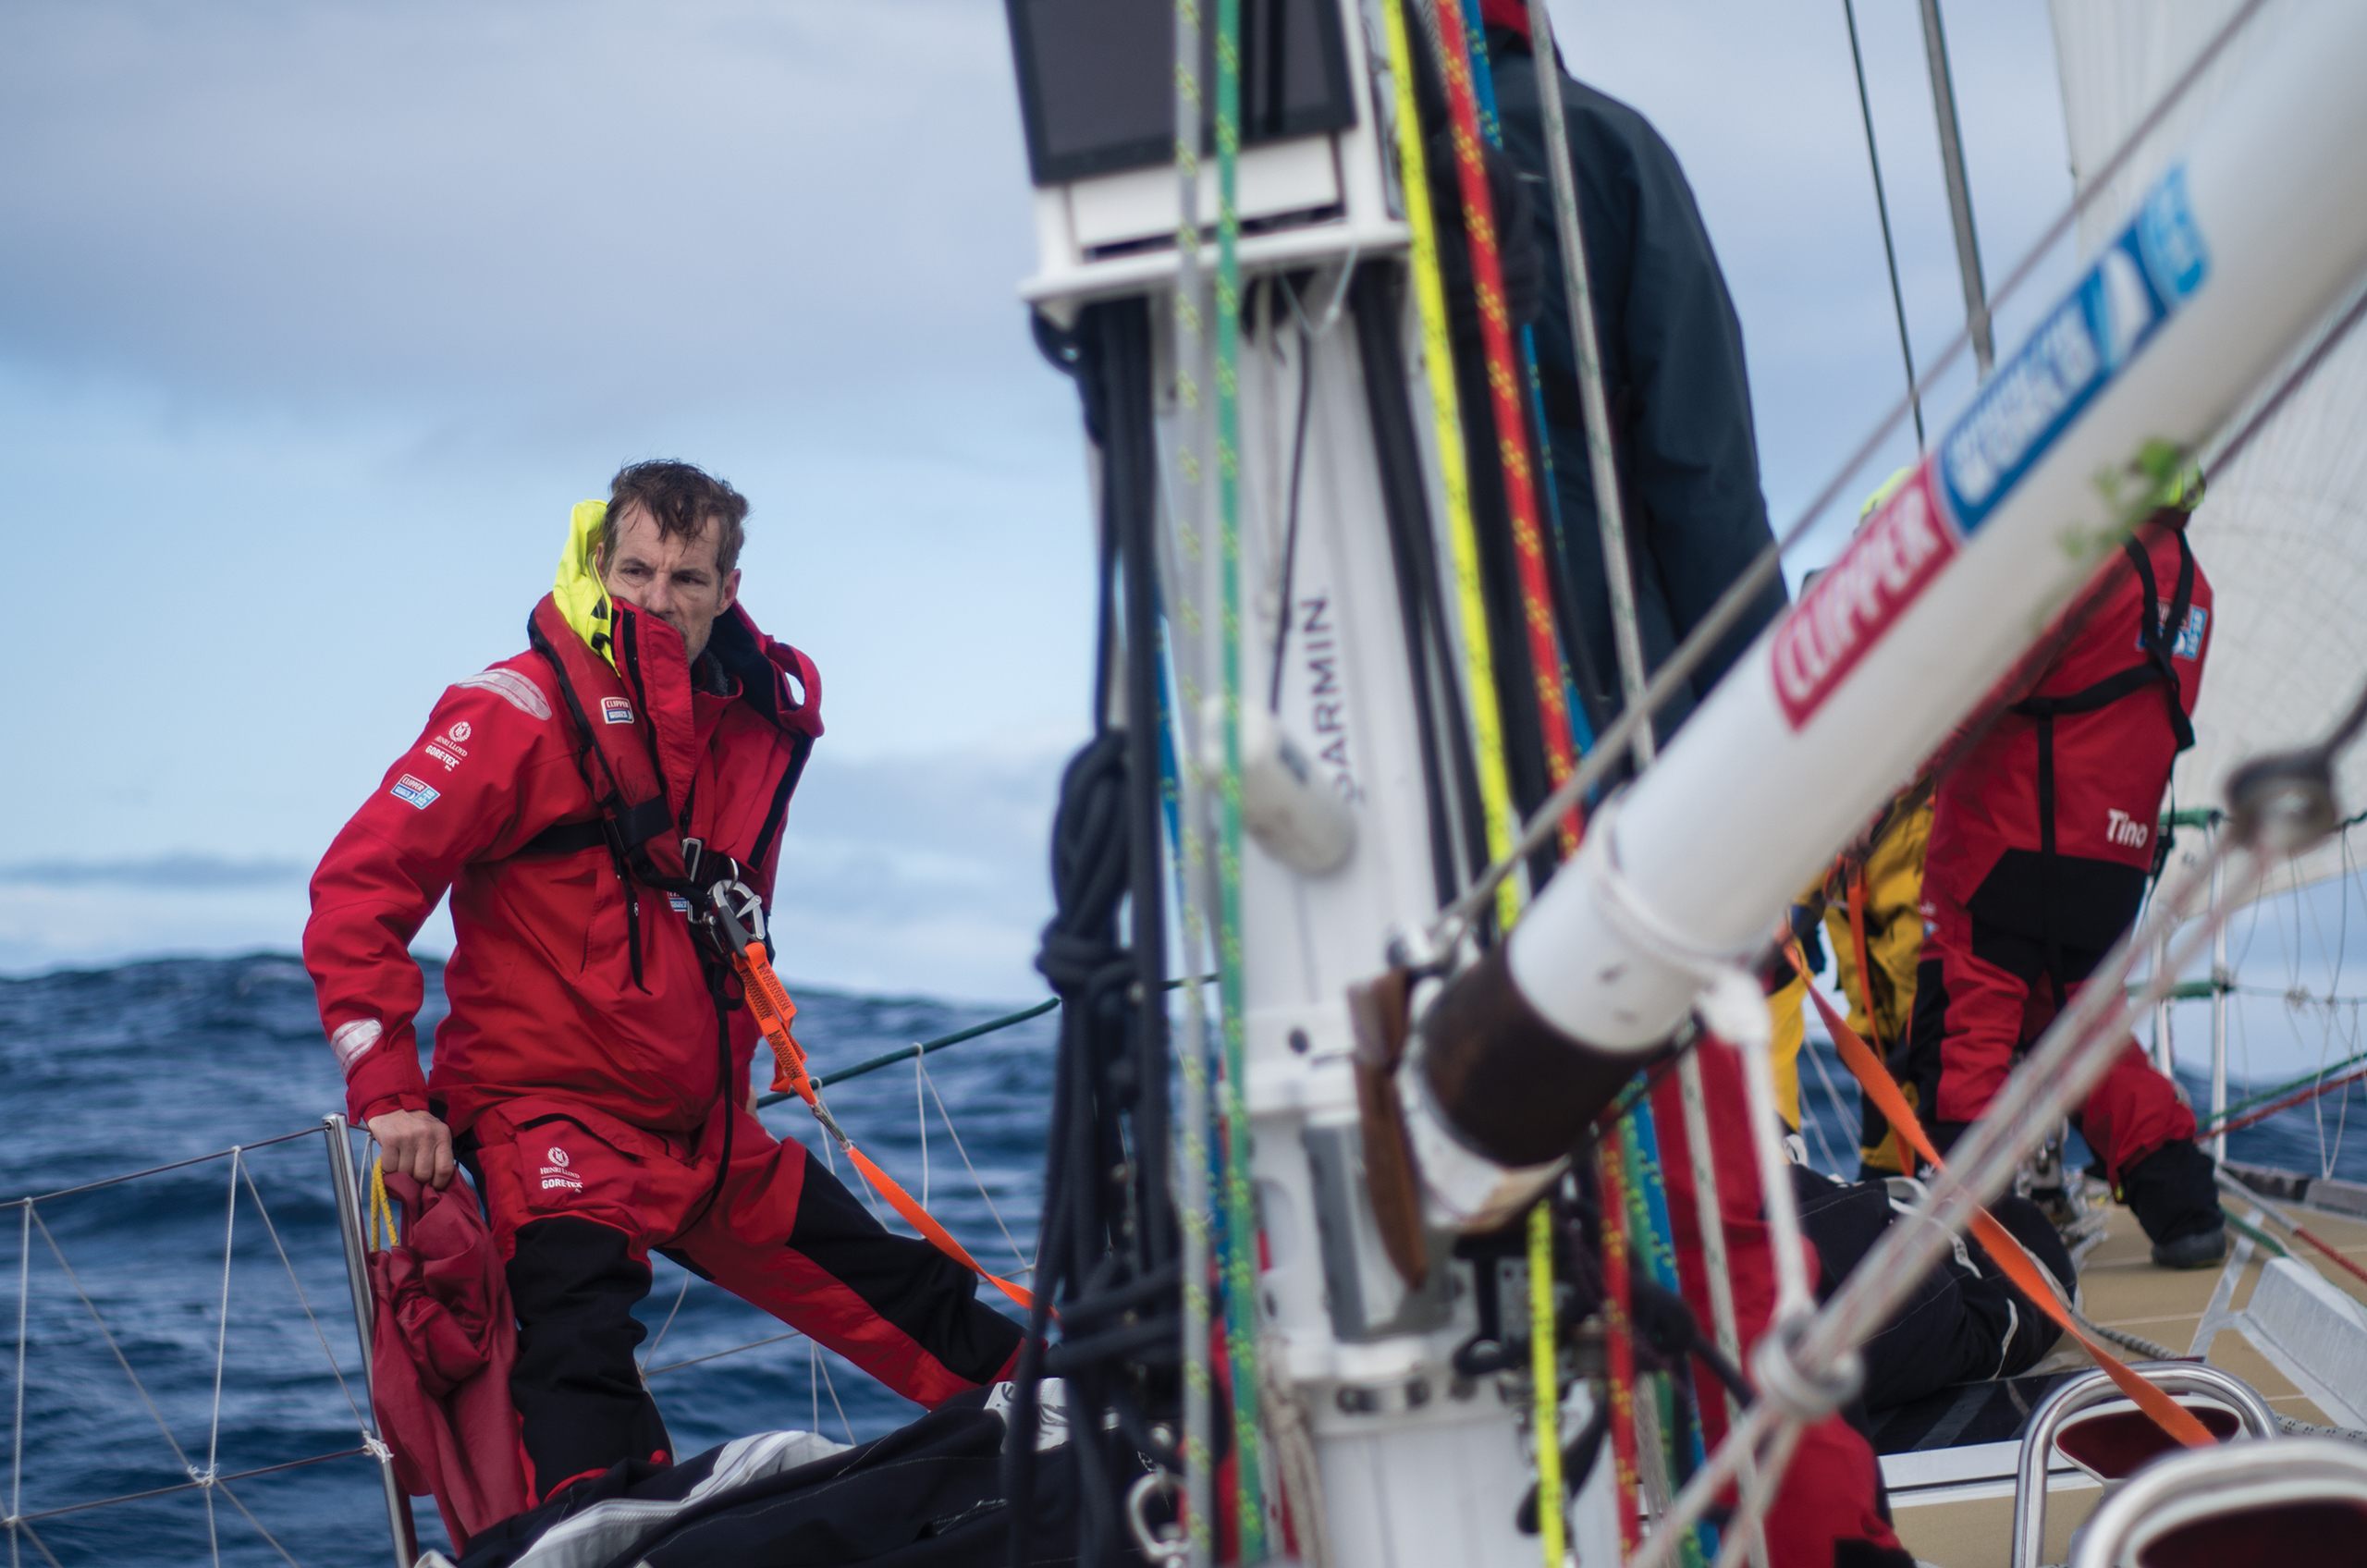 Martin Frey leans on the edge of his race yacht as he crosses the North Pacific ocean.